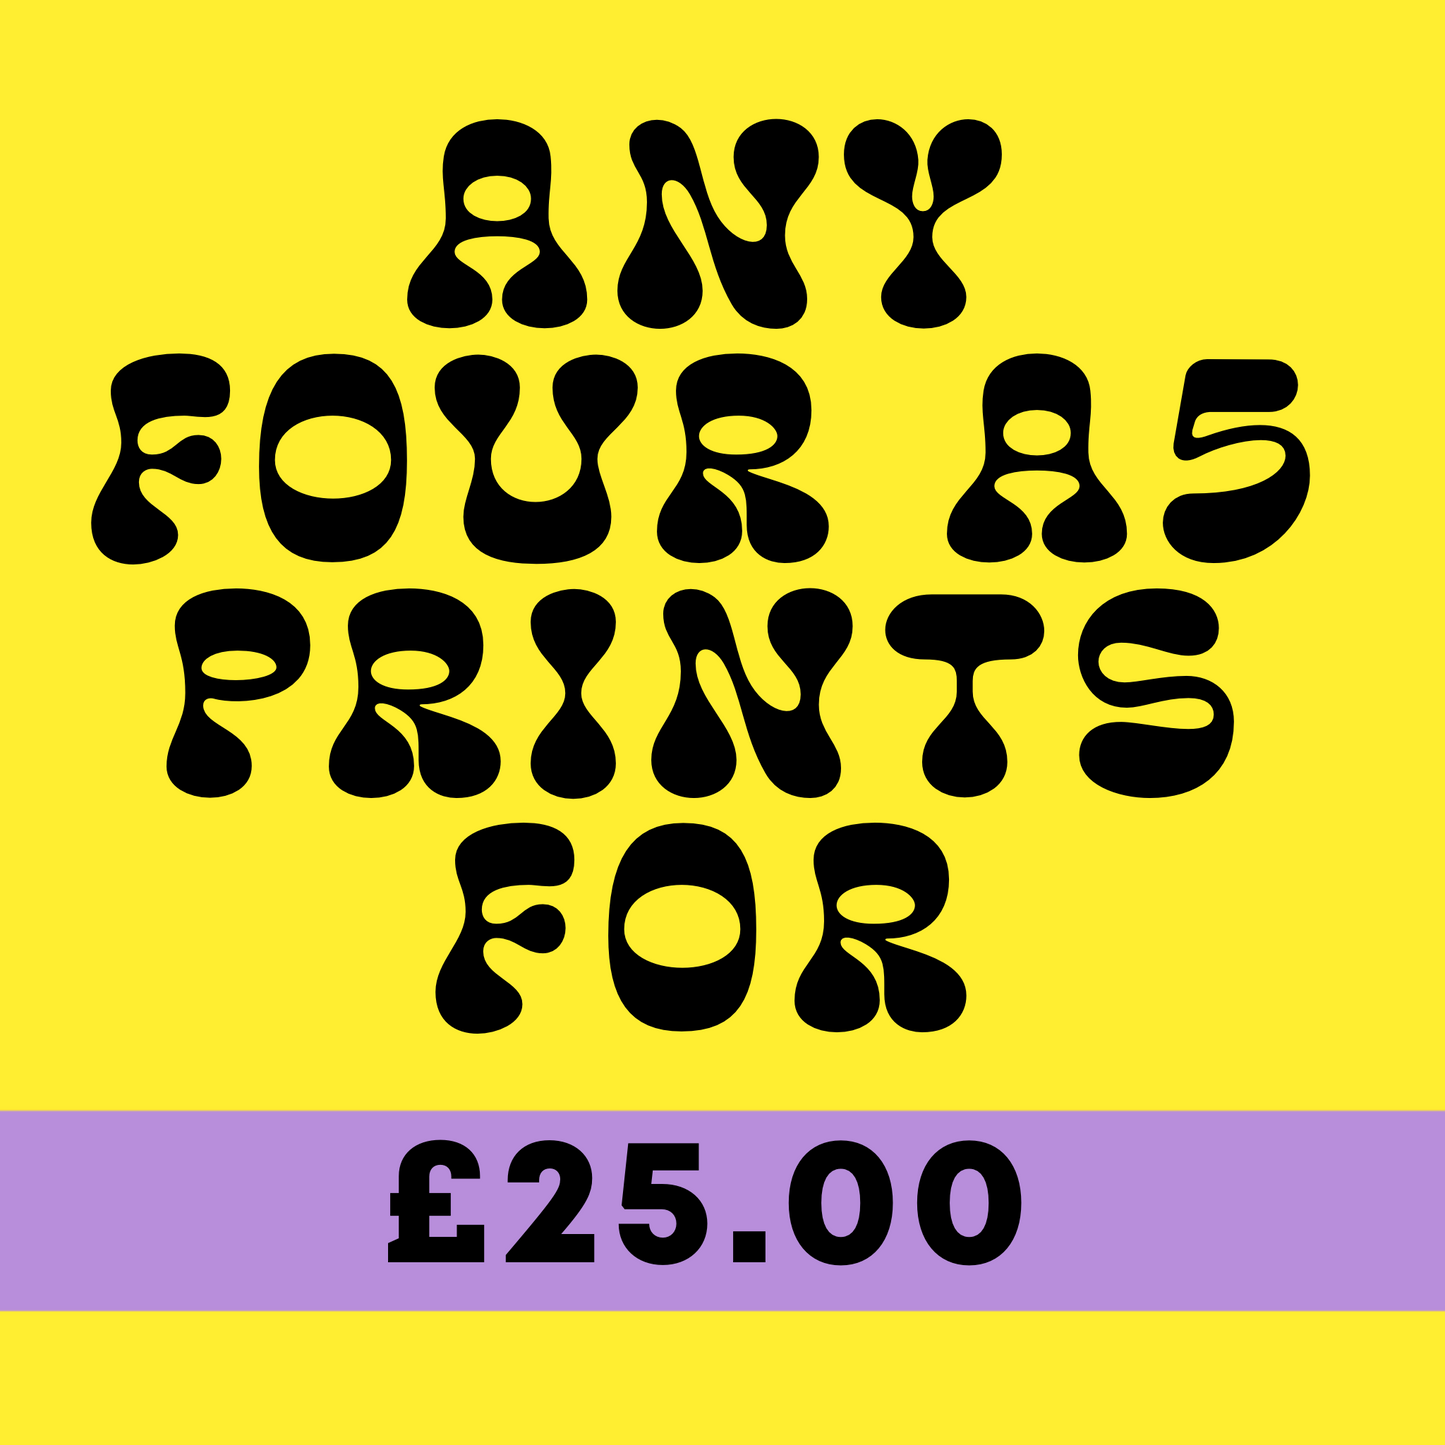 Four A5 Prints For £25